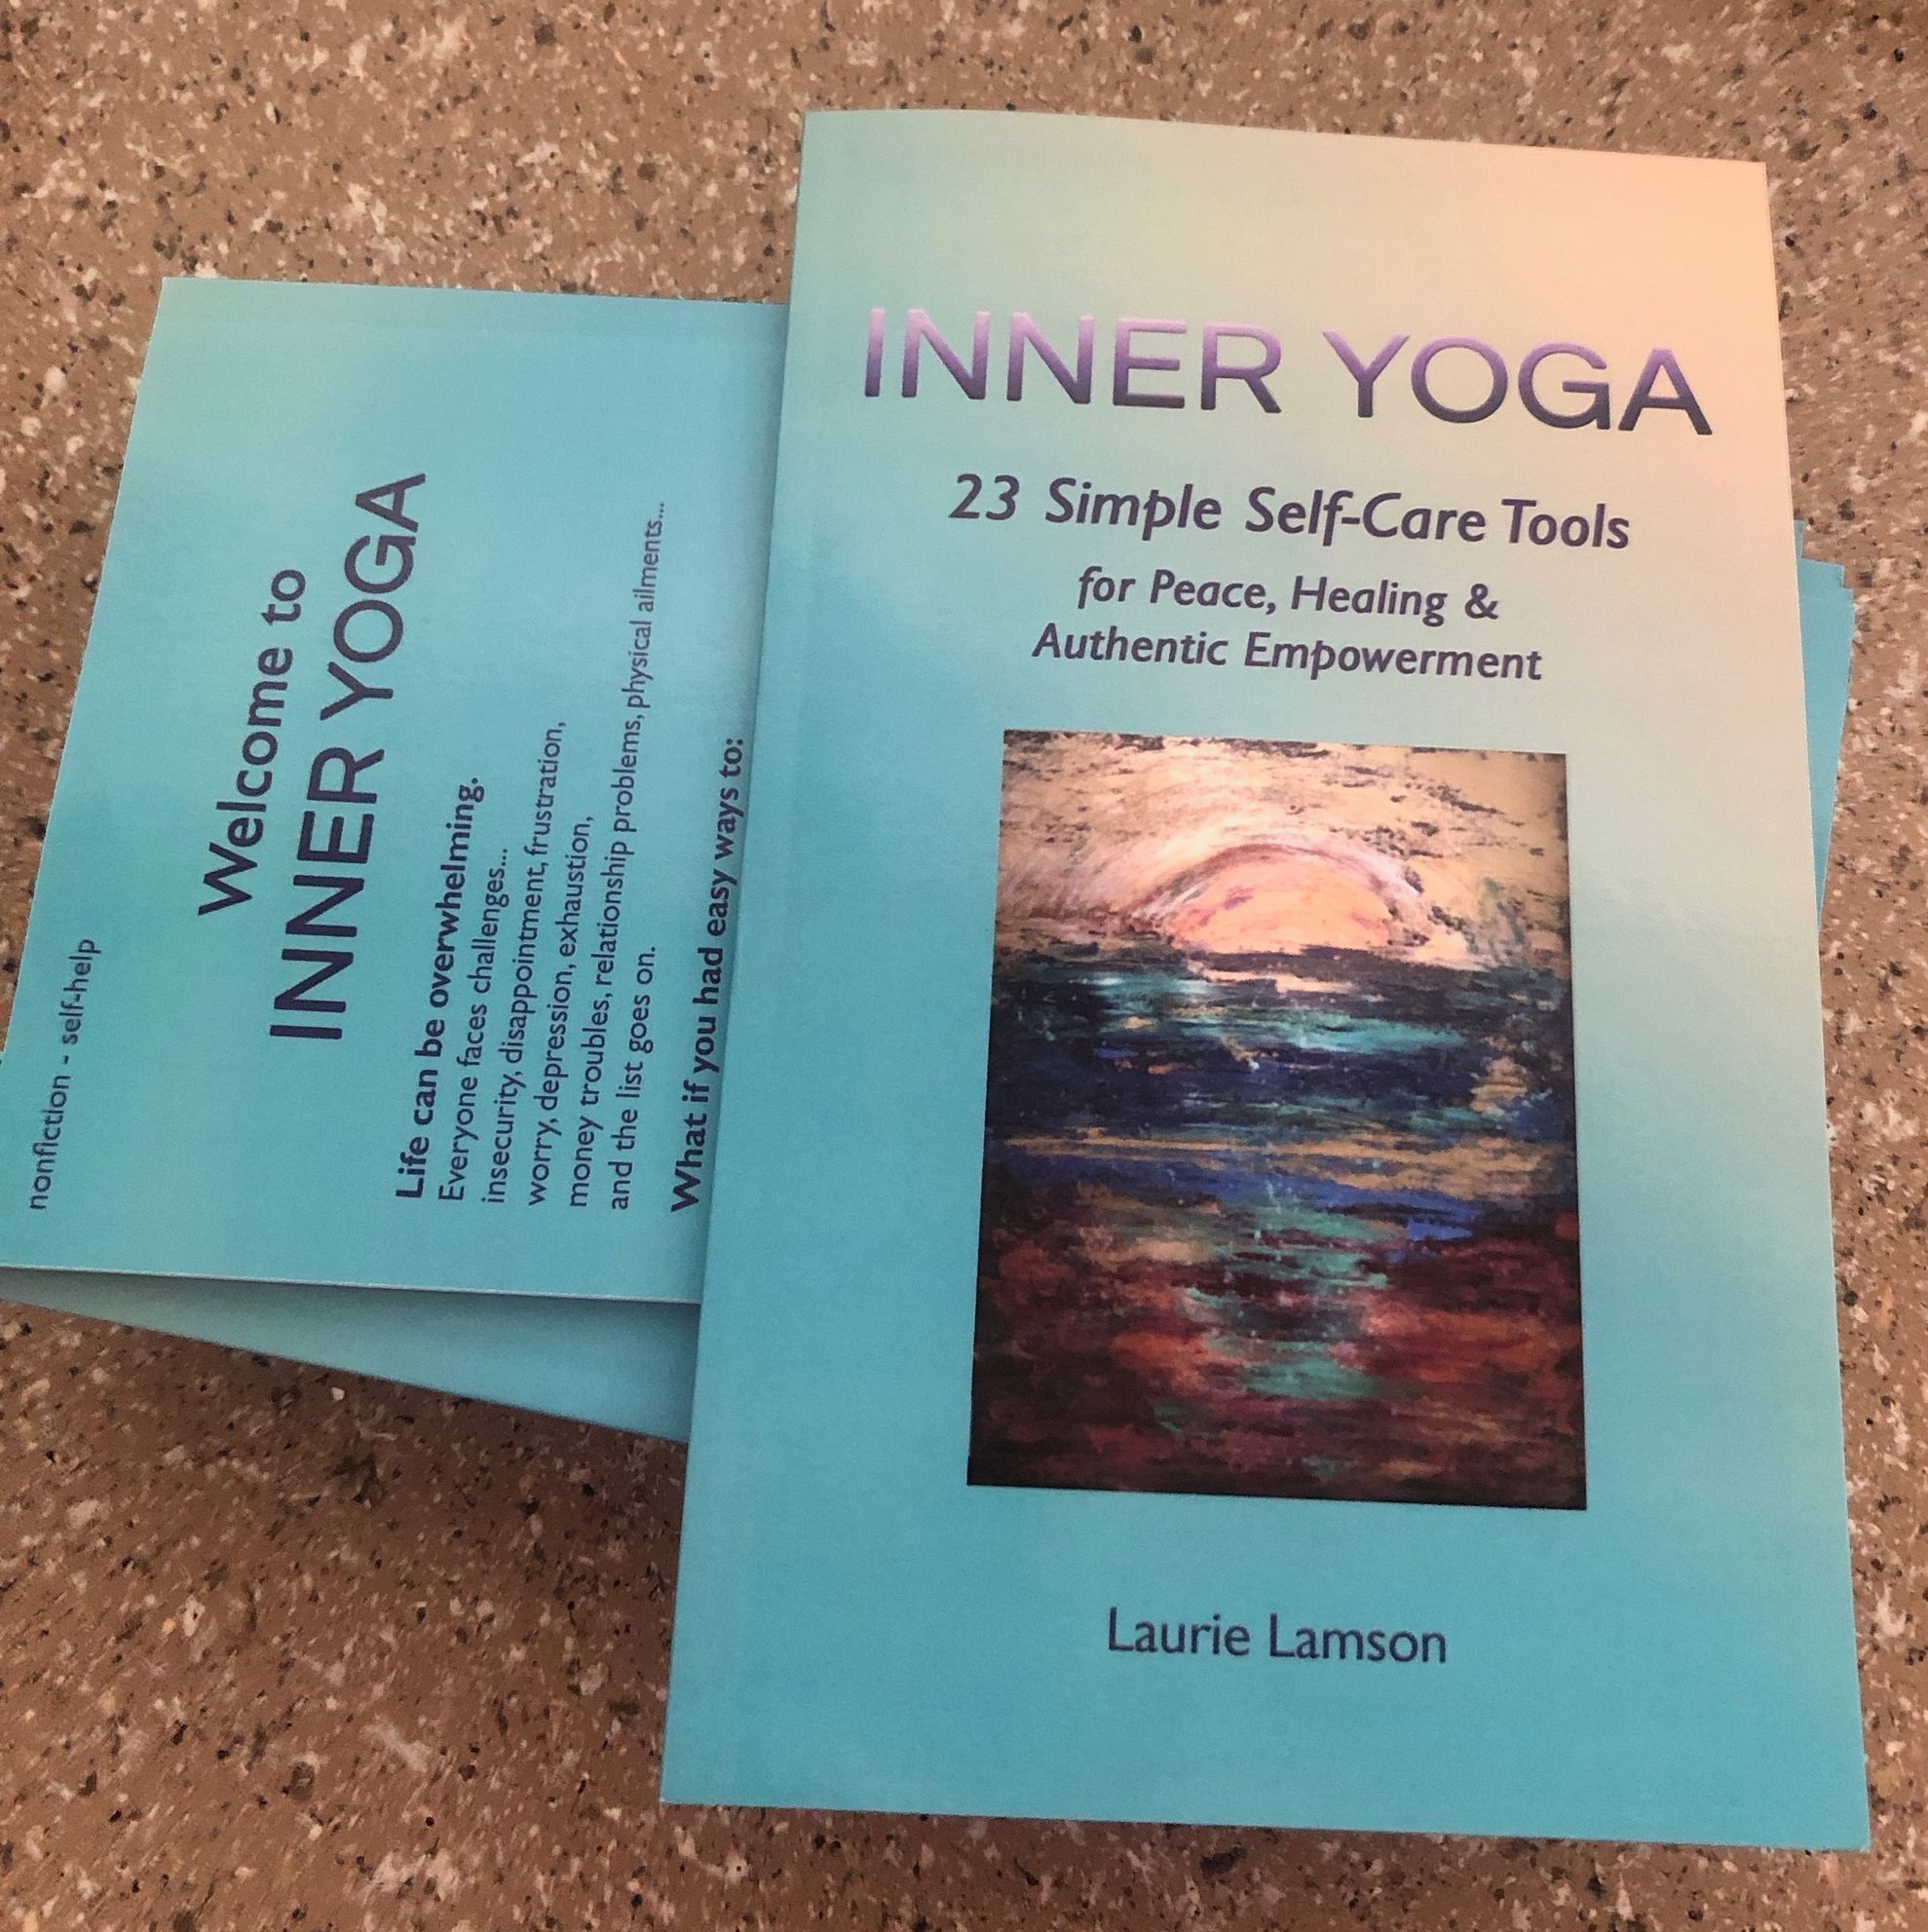 INNER YOGA: 23 Simple Self-Care Tools for Peace, Healing & Authentic Empowerment